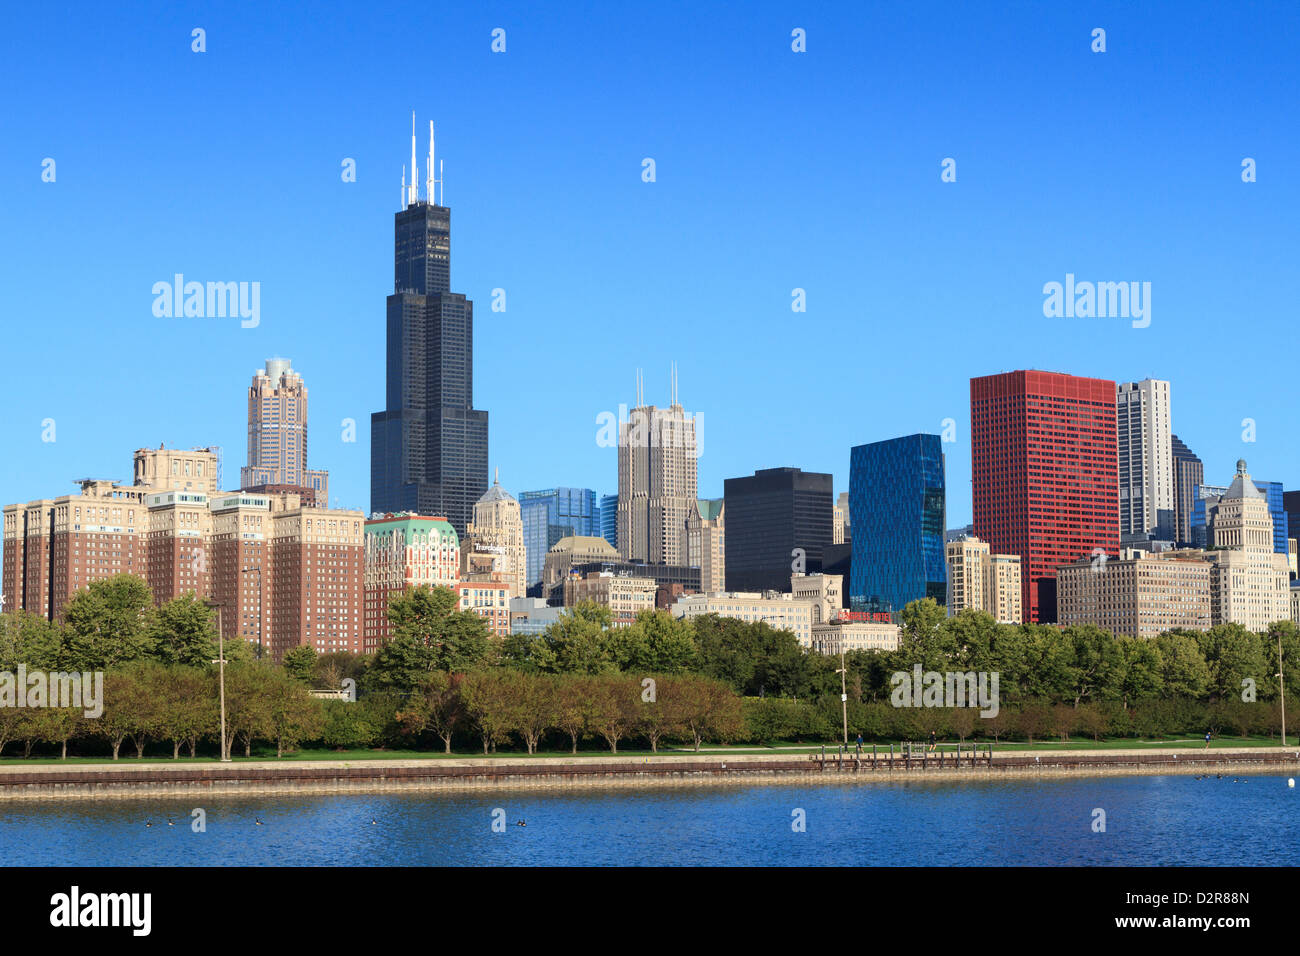 Chicago skyline and Lake Michigan with the Willis Tower, formerly the Sears Tower on the left, Chicago, Illinois, USA Stock Photo